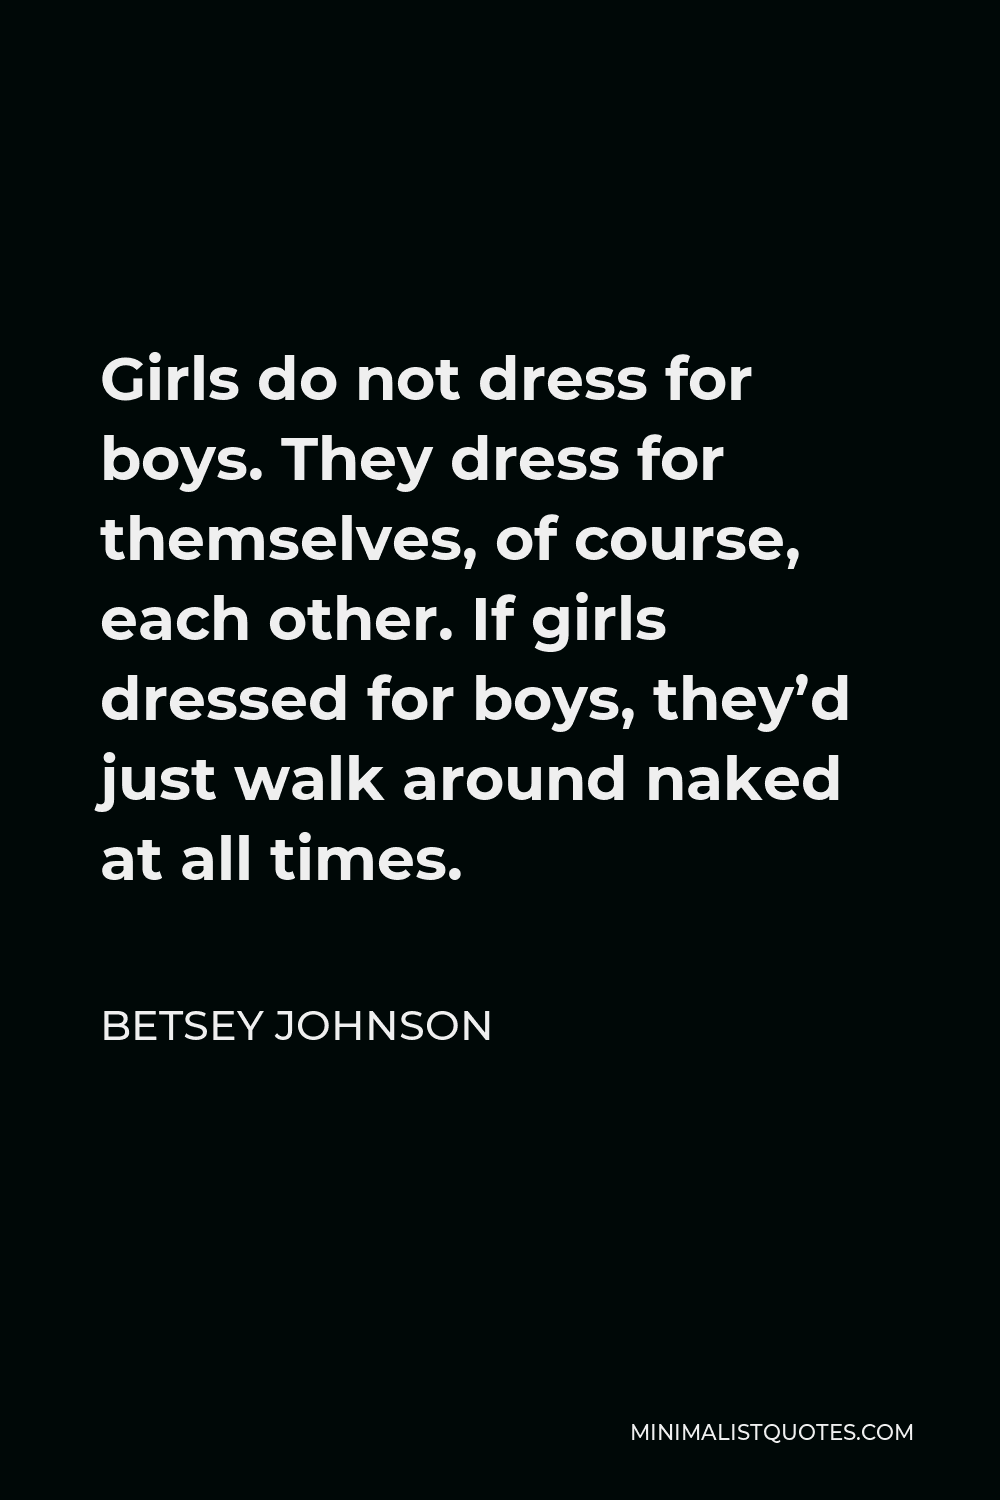 Betsey Johnson Quote - Girls do not dress for boys. They dress for themselves, of course, each other. If girls dressed for boys, they’d just walk around naked at all times.